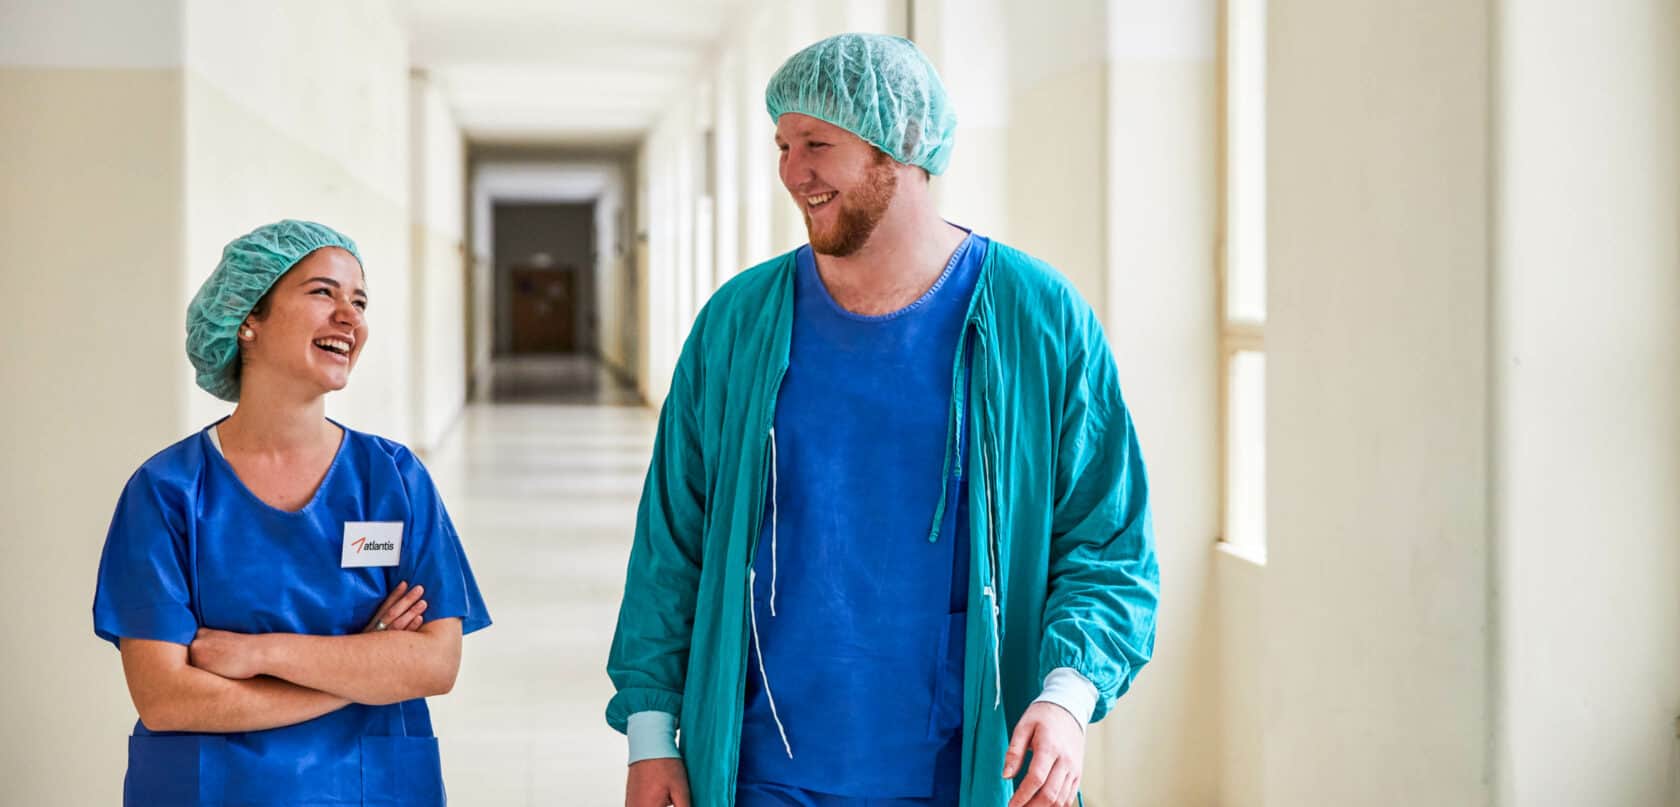 Students walking down a hallway in the hospital.